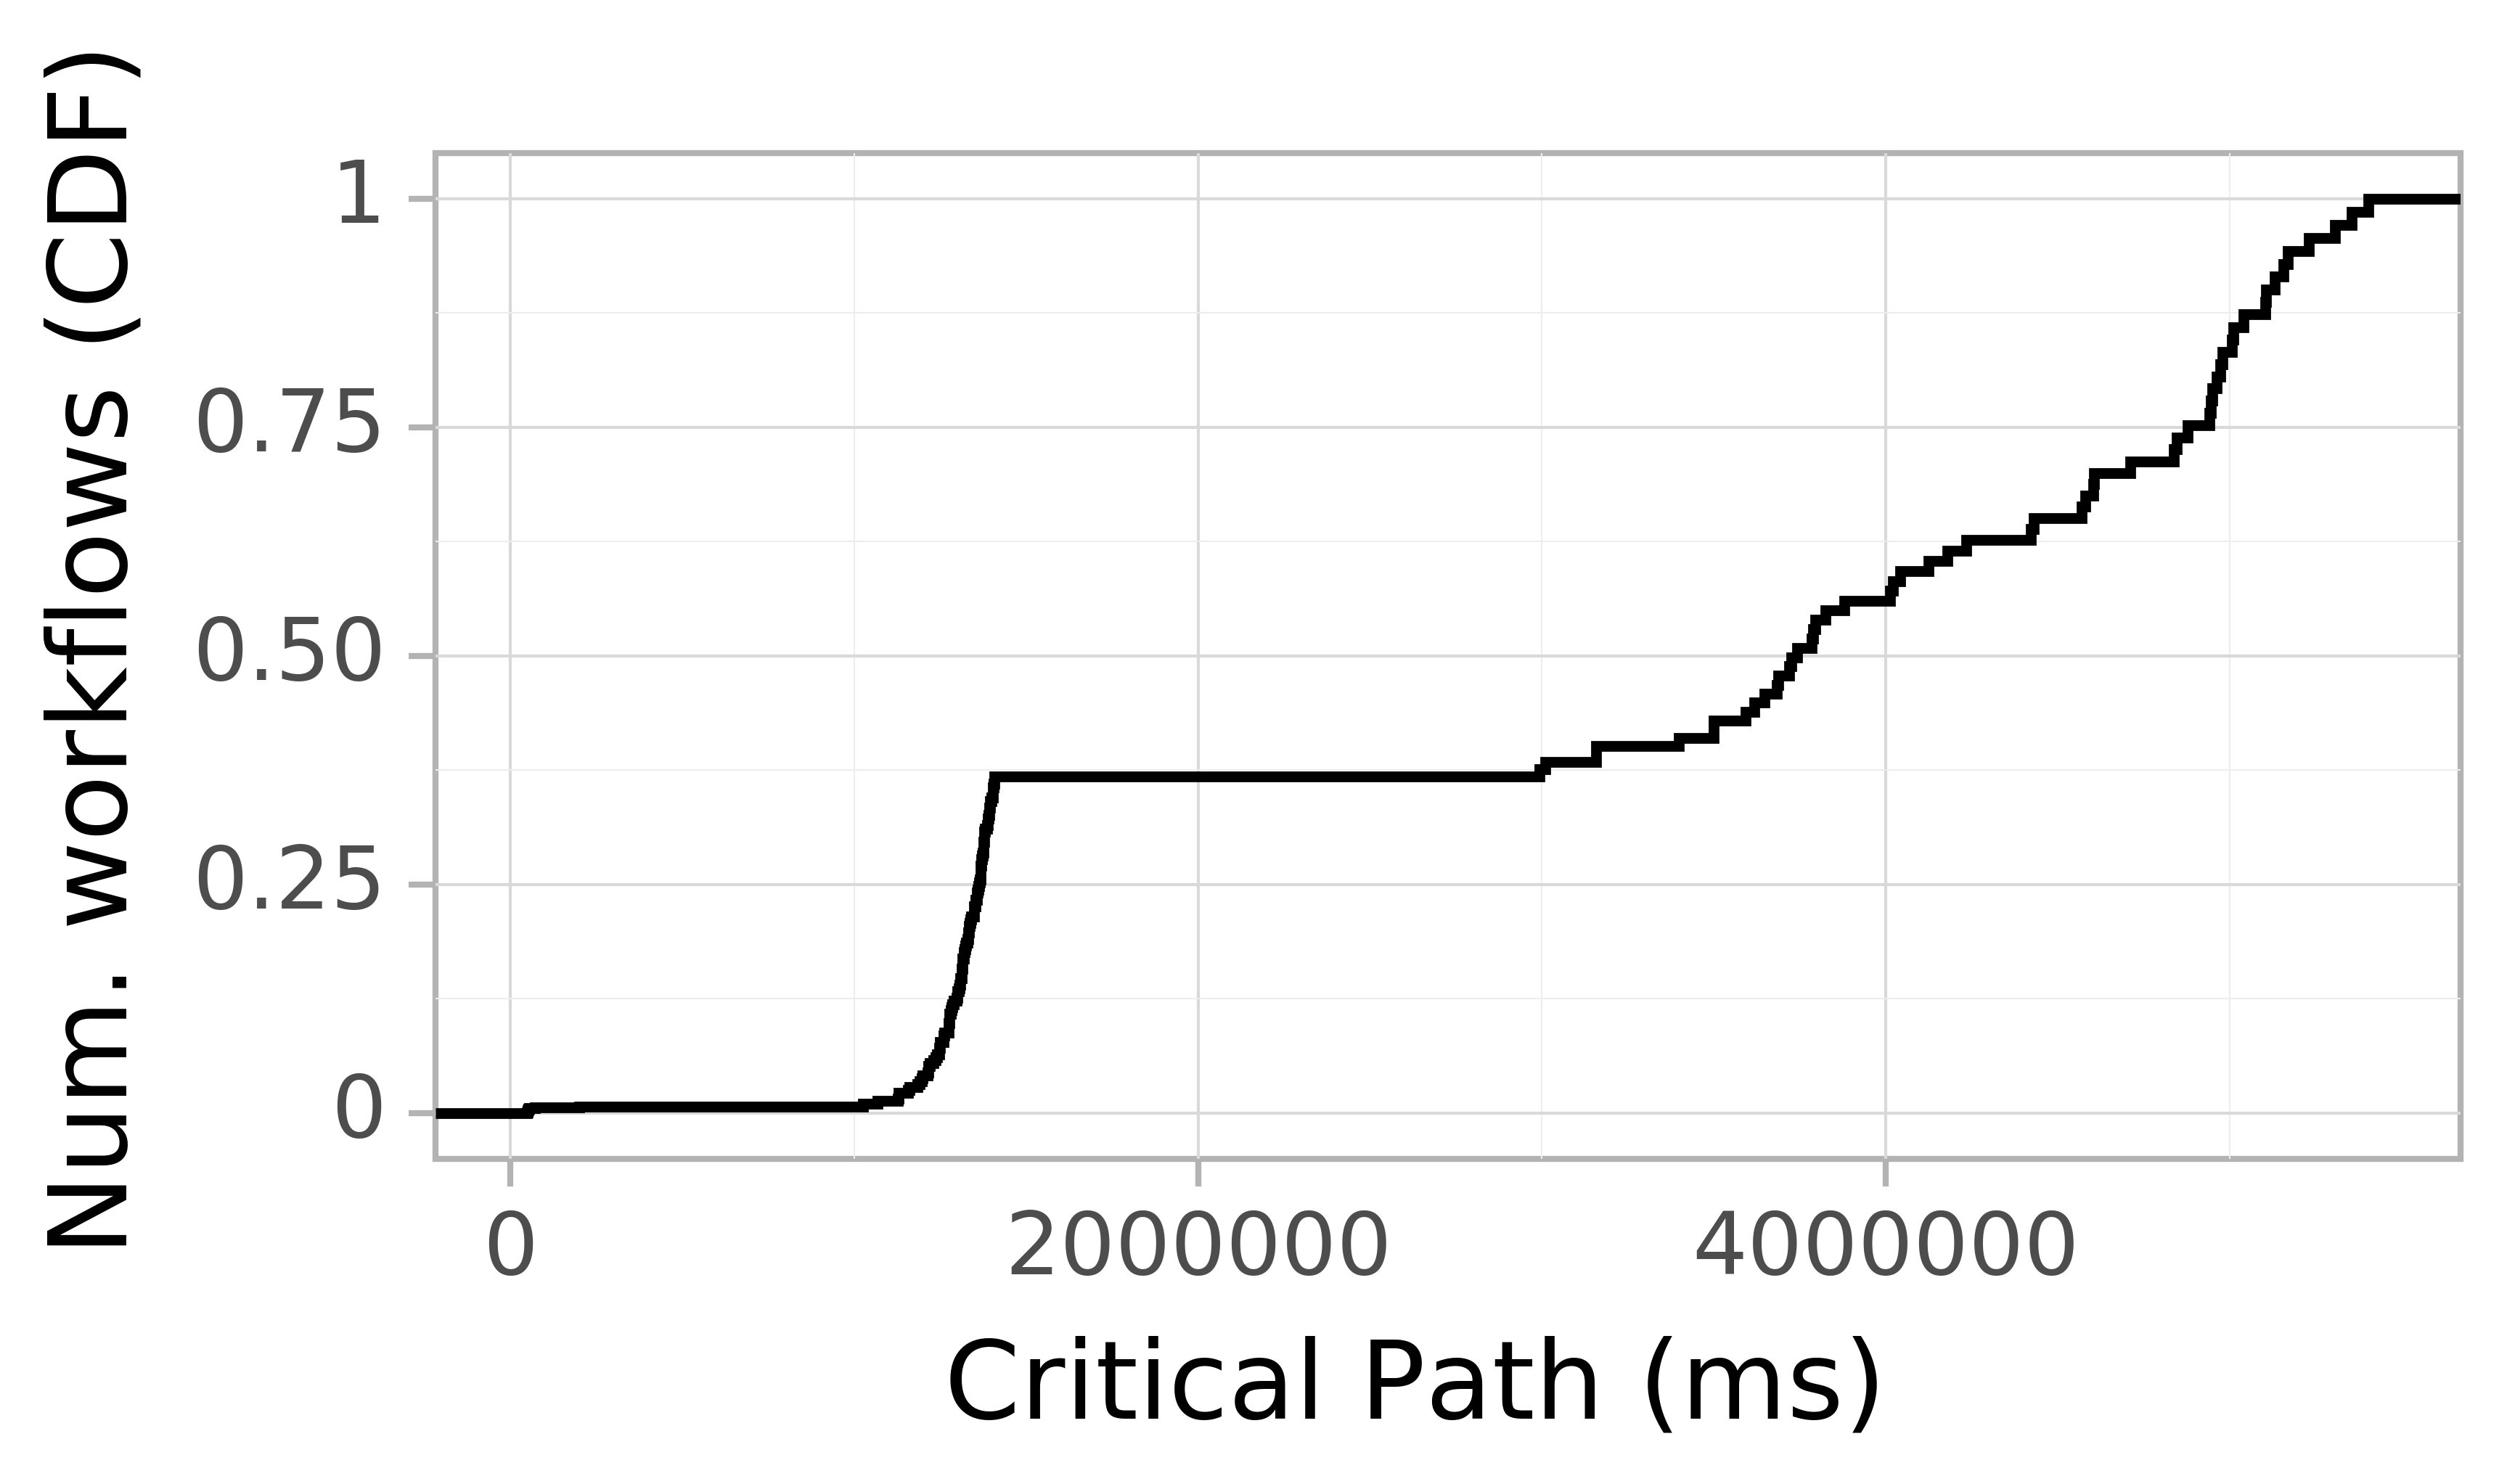 Job runtime CDF graph for the spec_trace-2 trace.